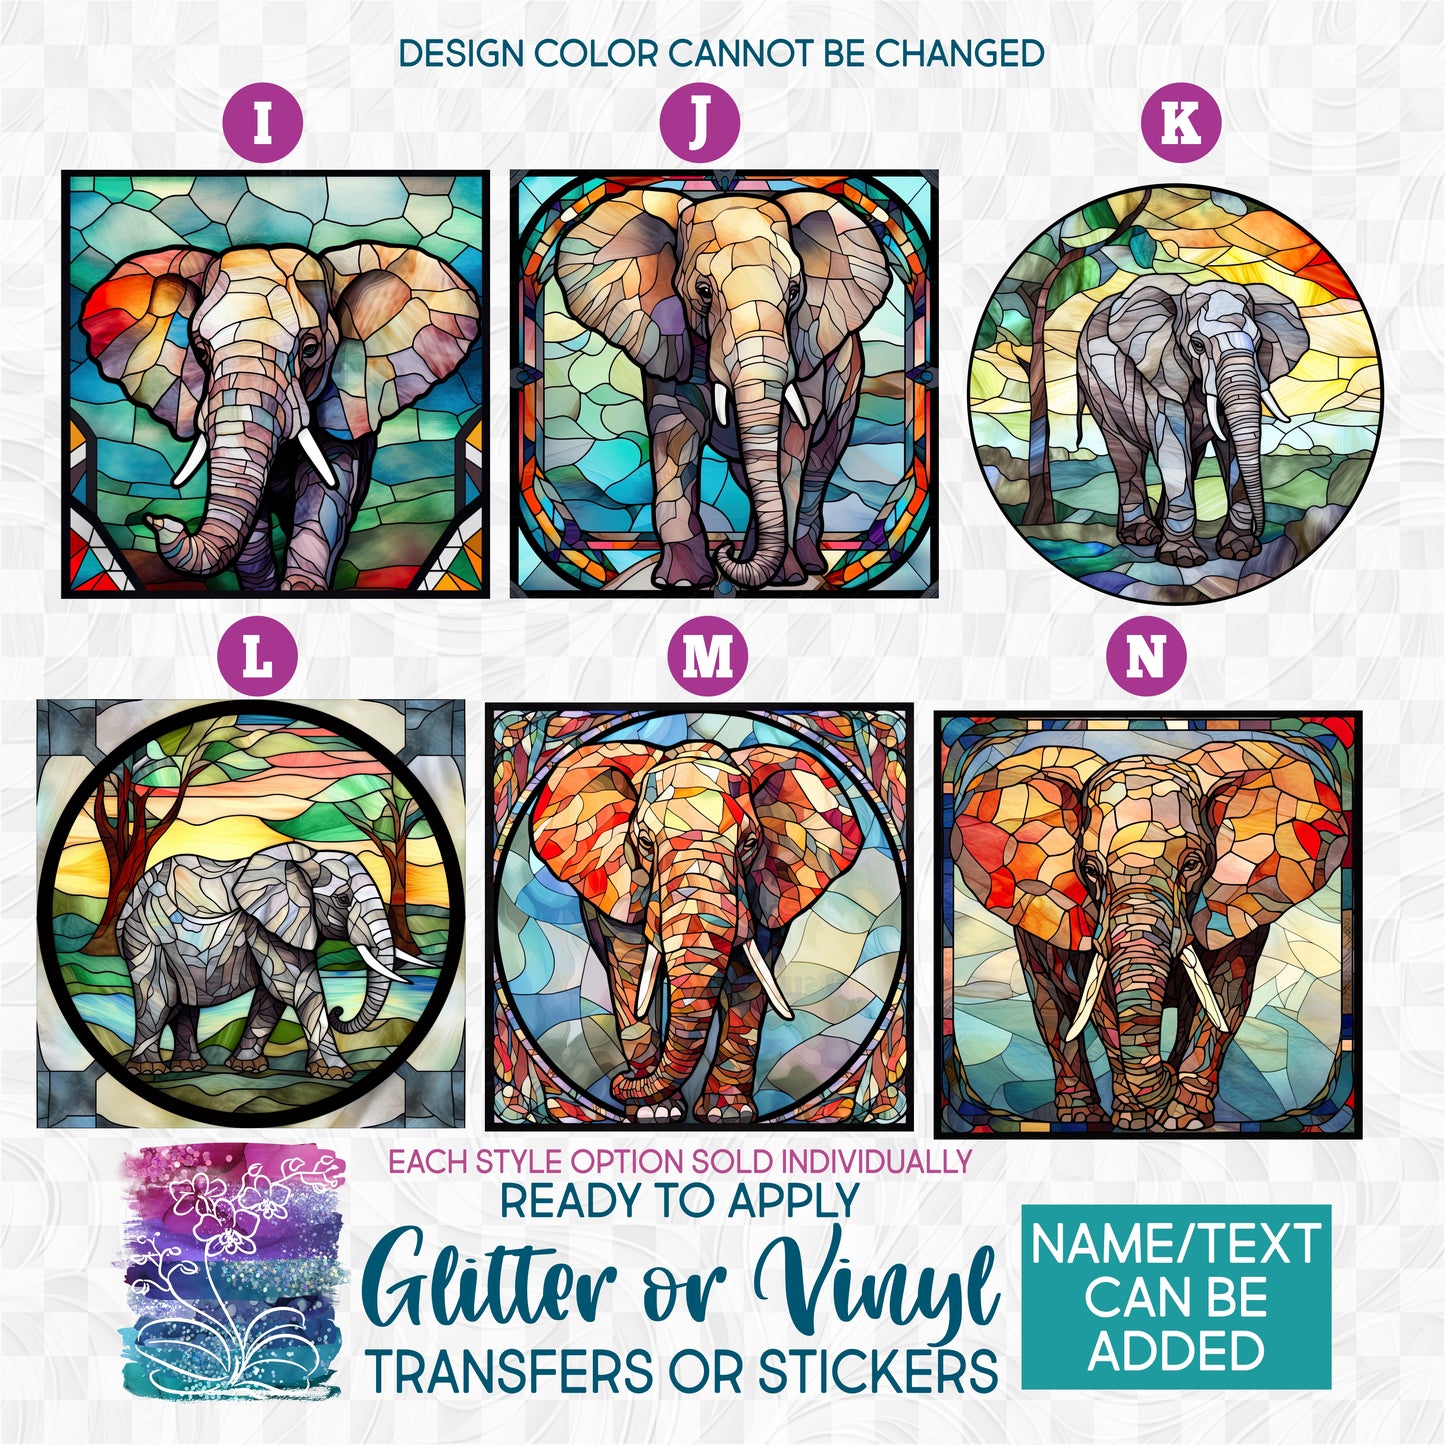 (s150-11) Stained-Glass Elephant a Glitter or Vinyl Iron-On Transfer or Sticker